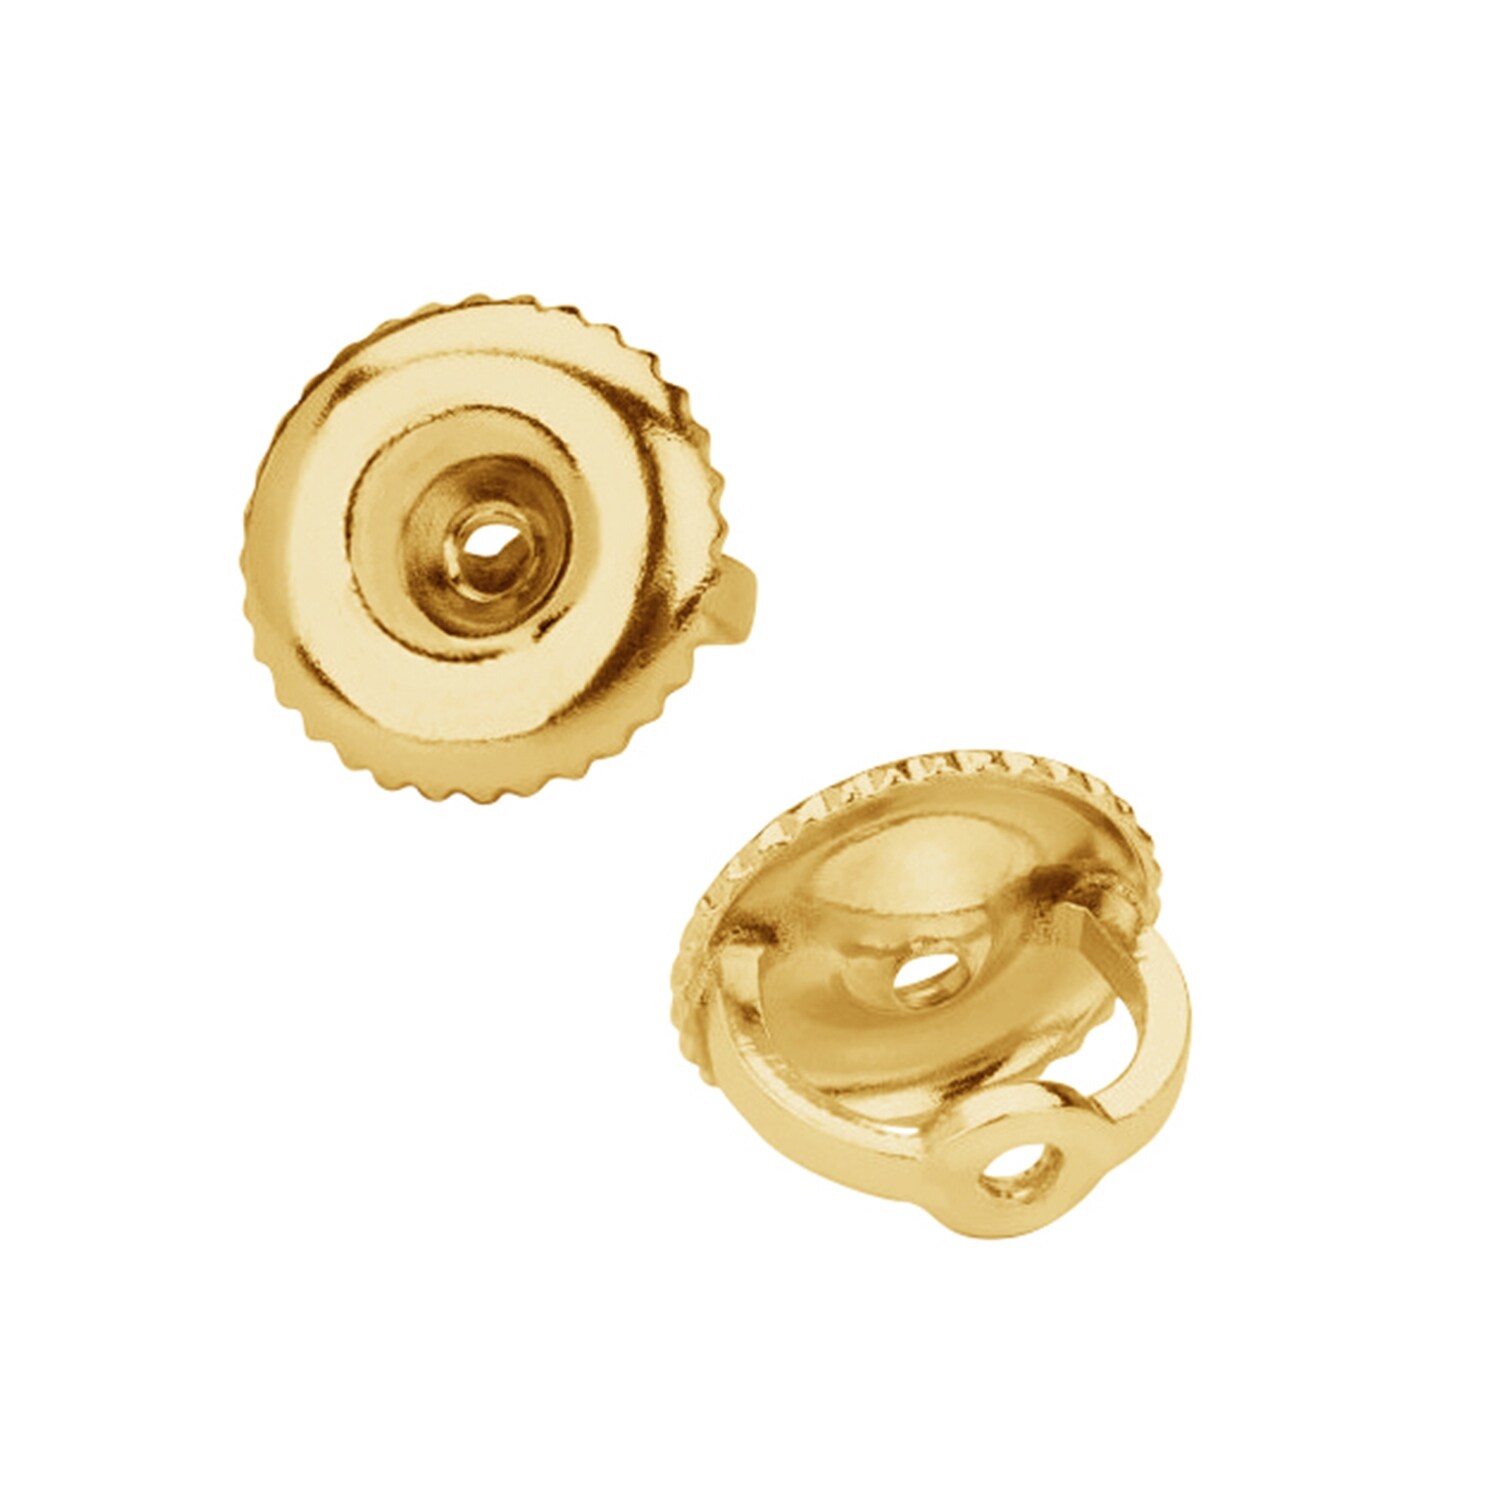 Prism Jewel 0.18 Carat Round Yellow Diamond Screw Back Prong Set Stud Earrings Crafted In Gold